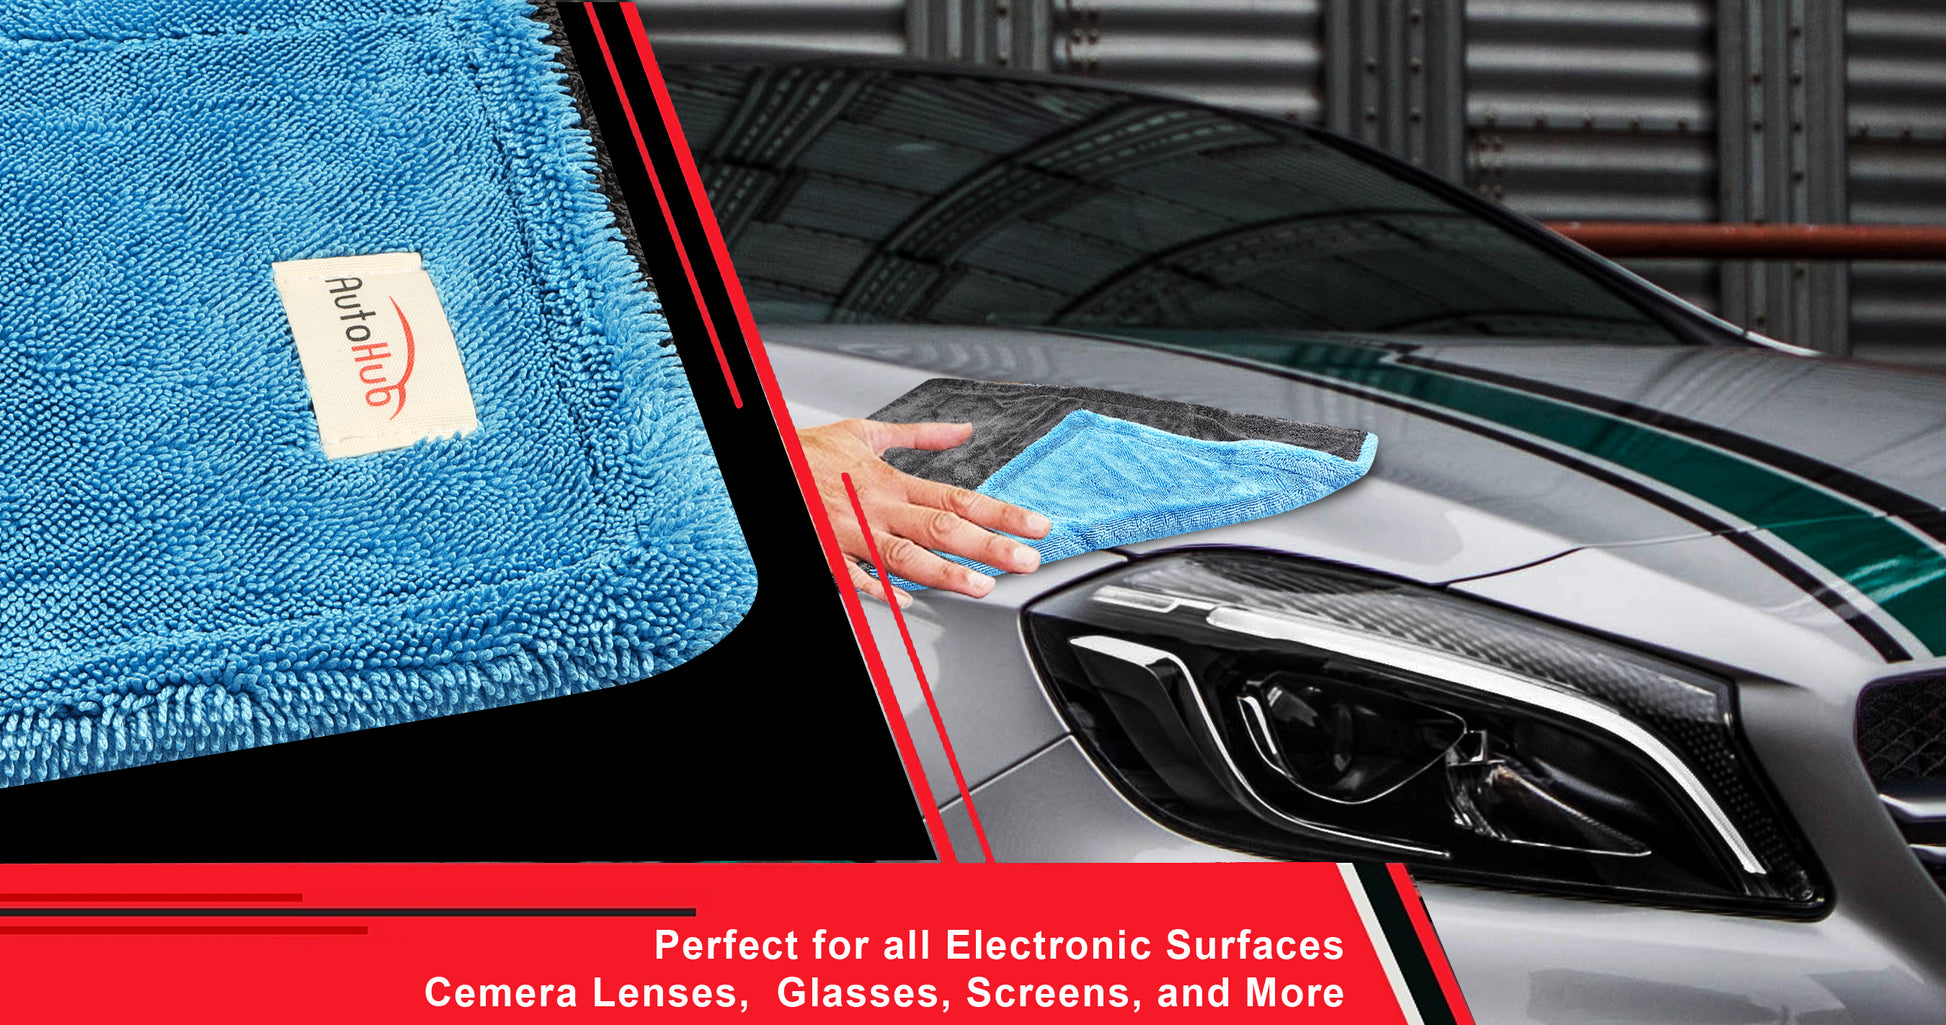 The Microfiber Detailing Cloth is the perfect car detailing